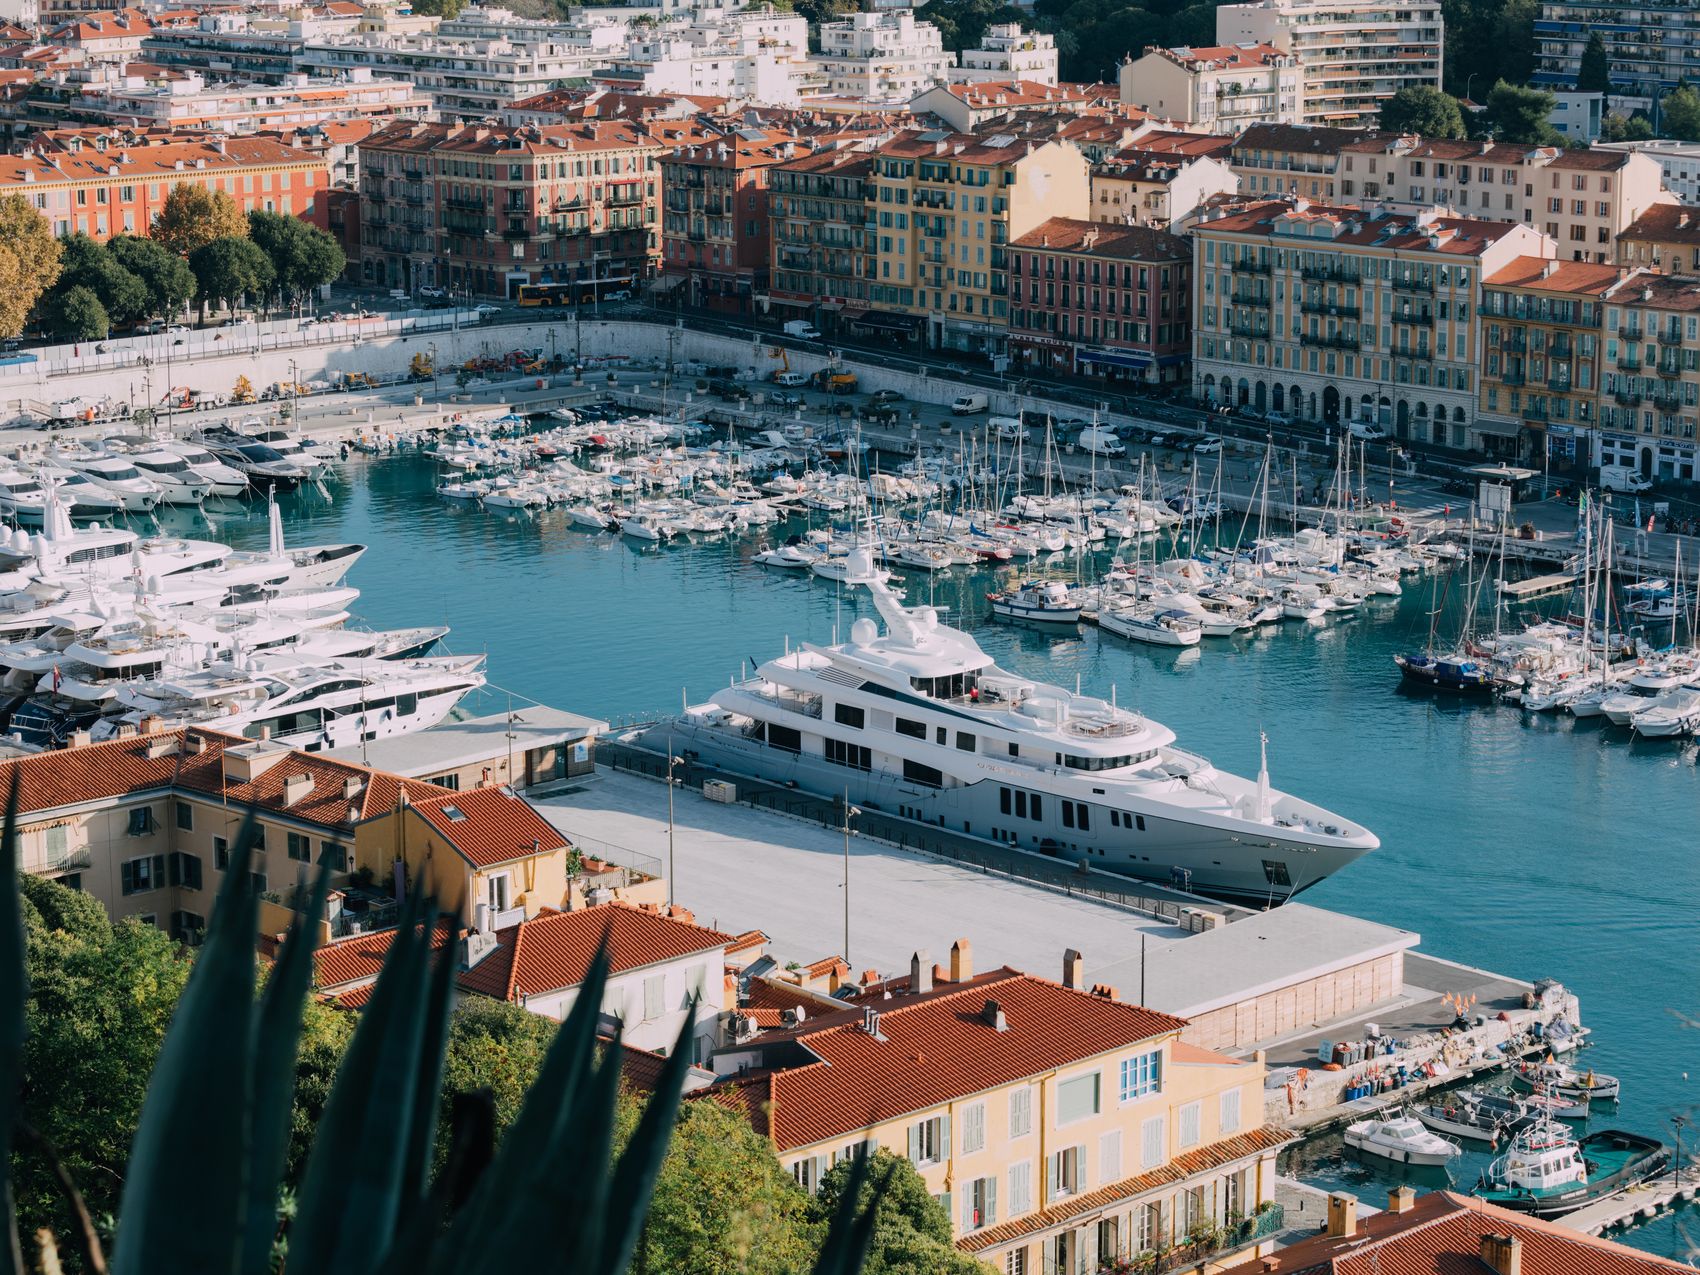 Yachts at the marina in Nice in Southern France.